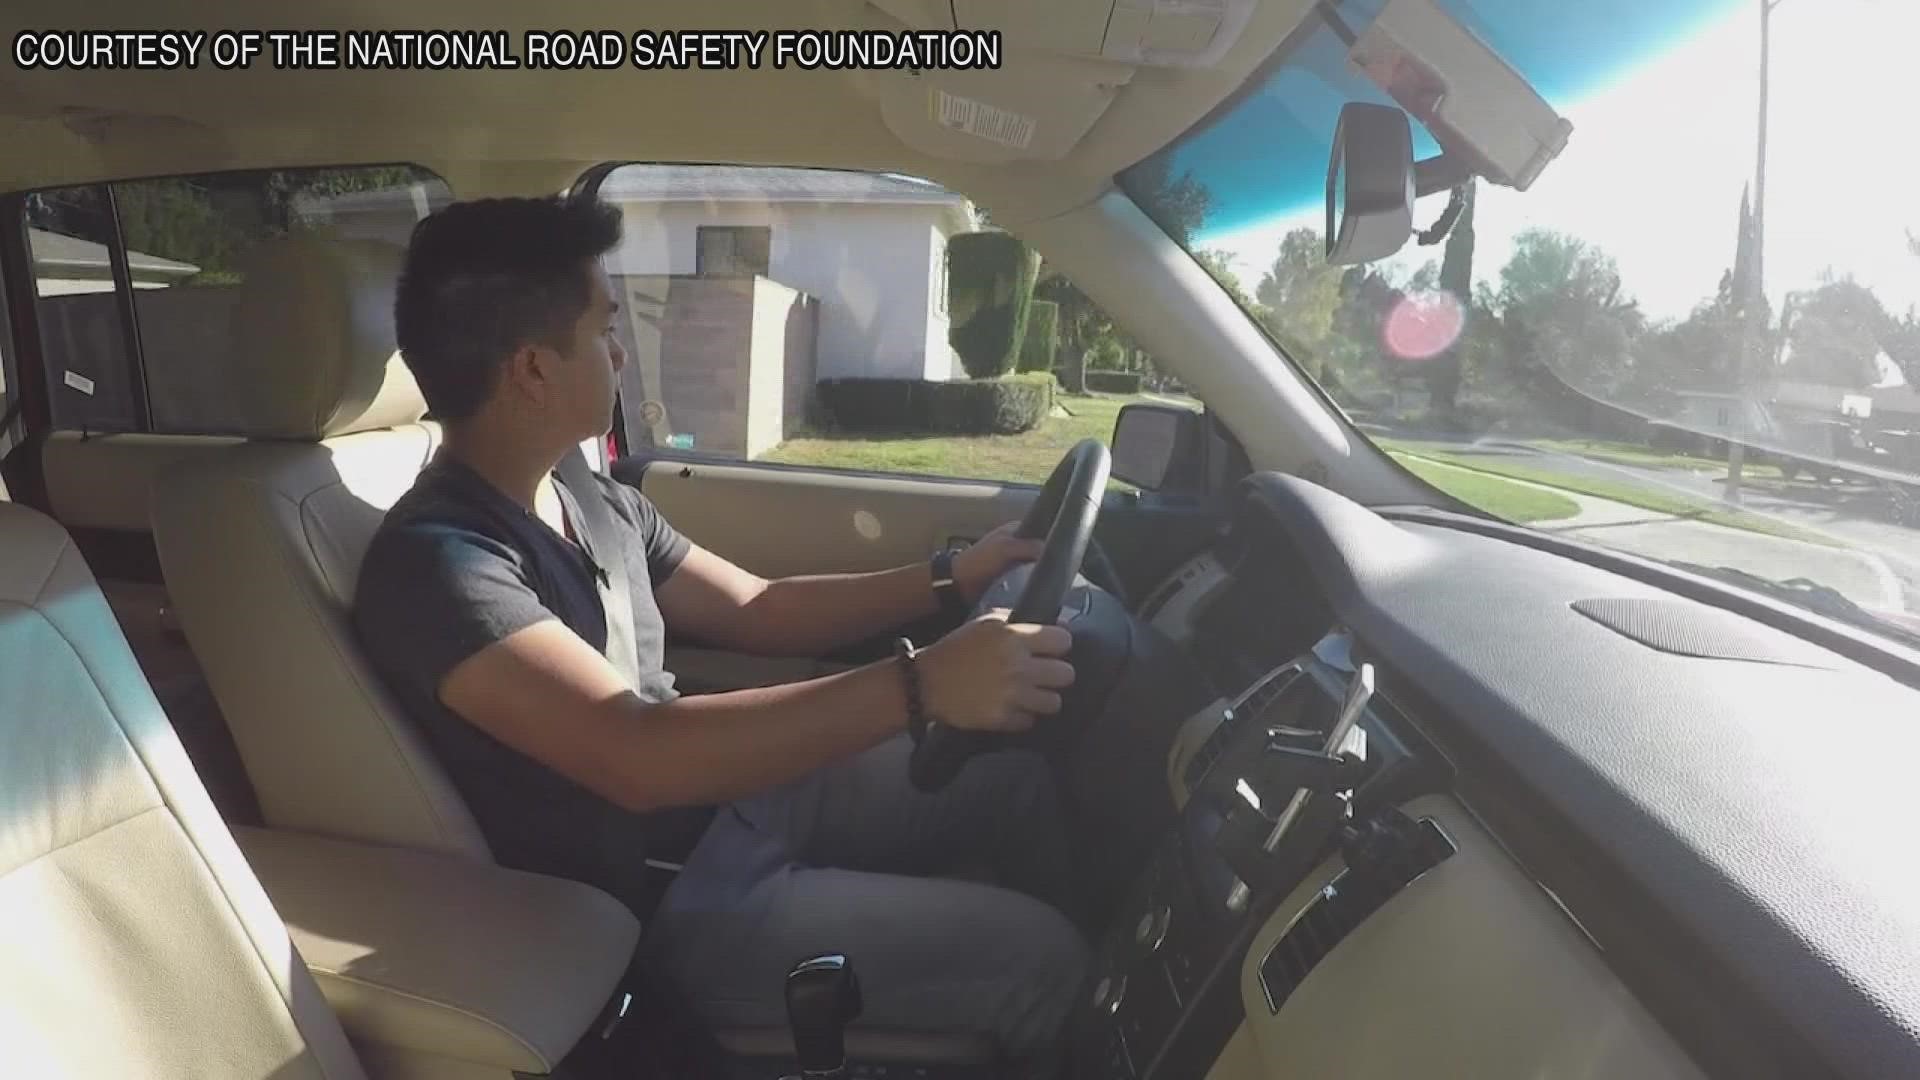 The campaign aims to encourage passengers to speak up during unsafe car rides.